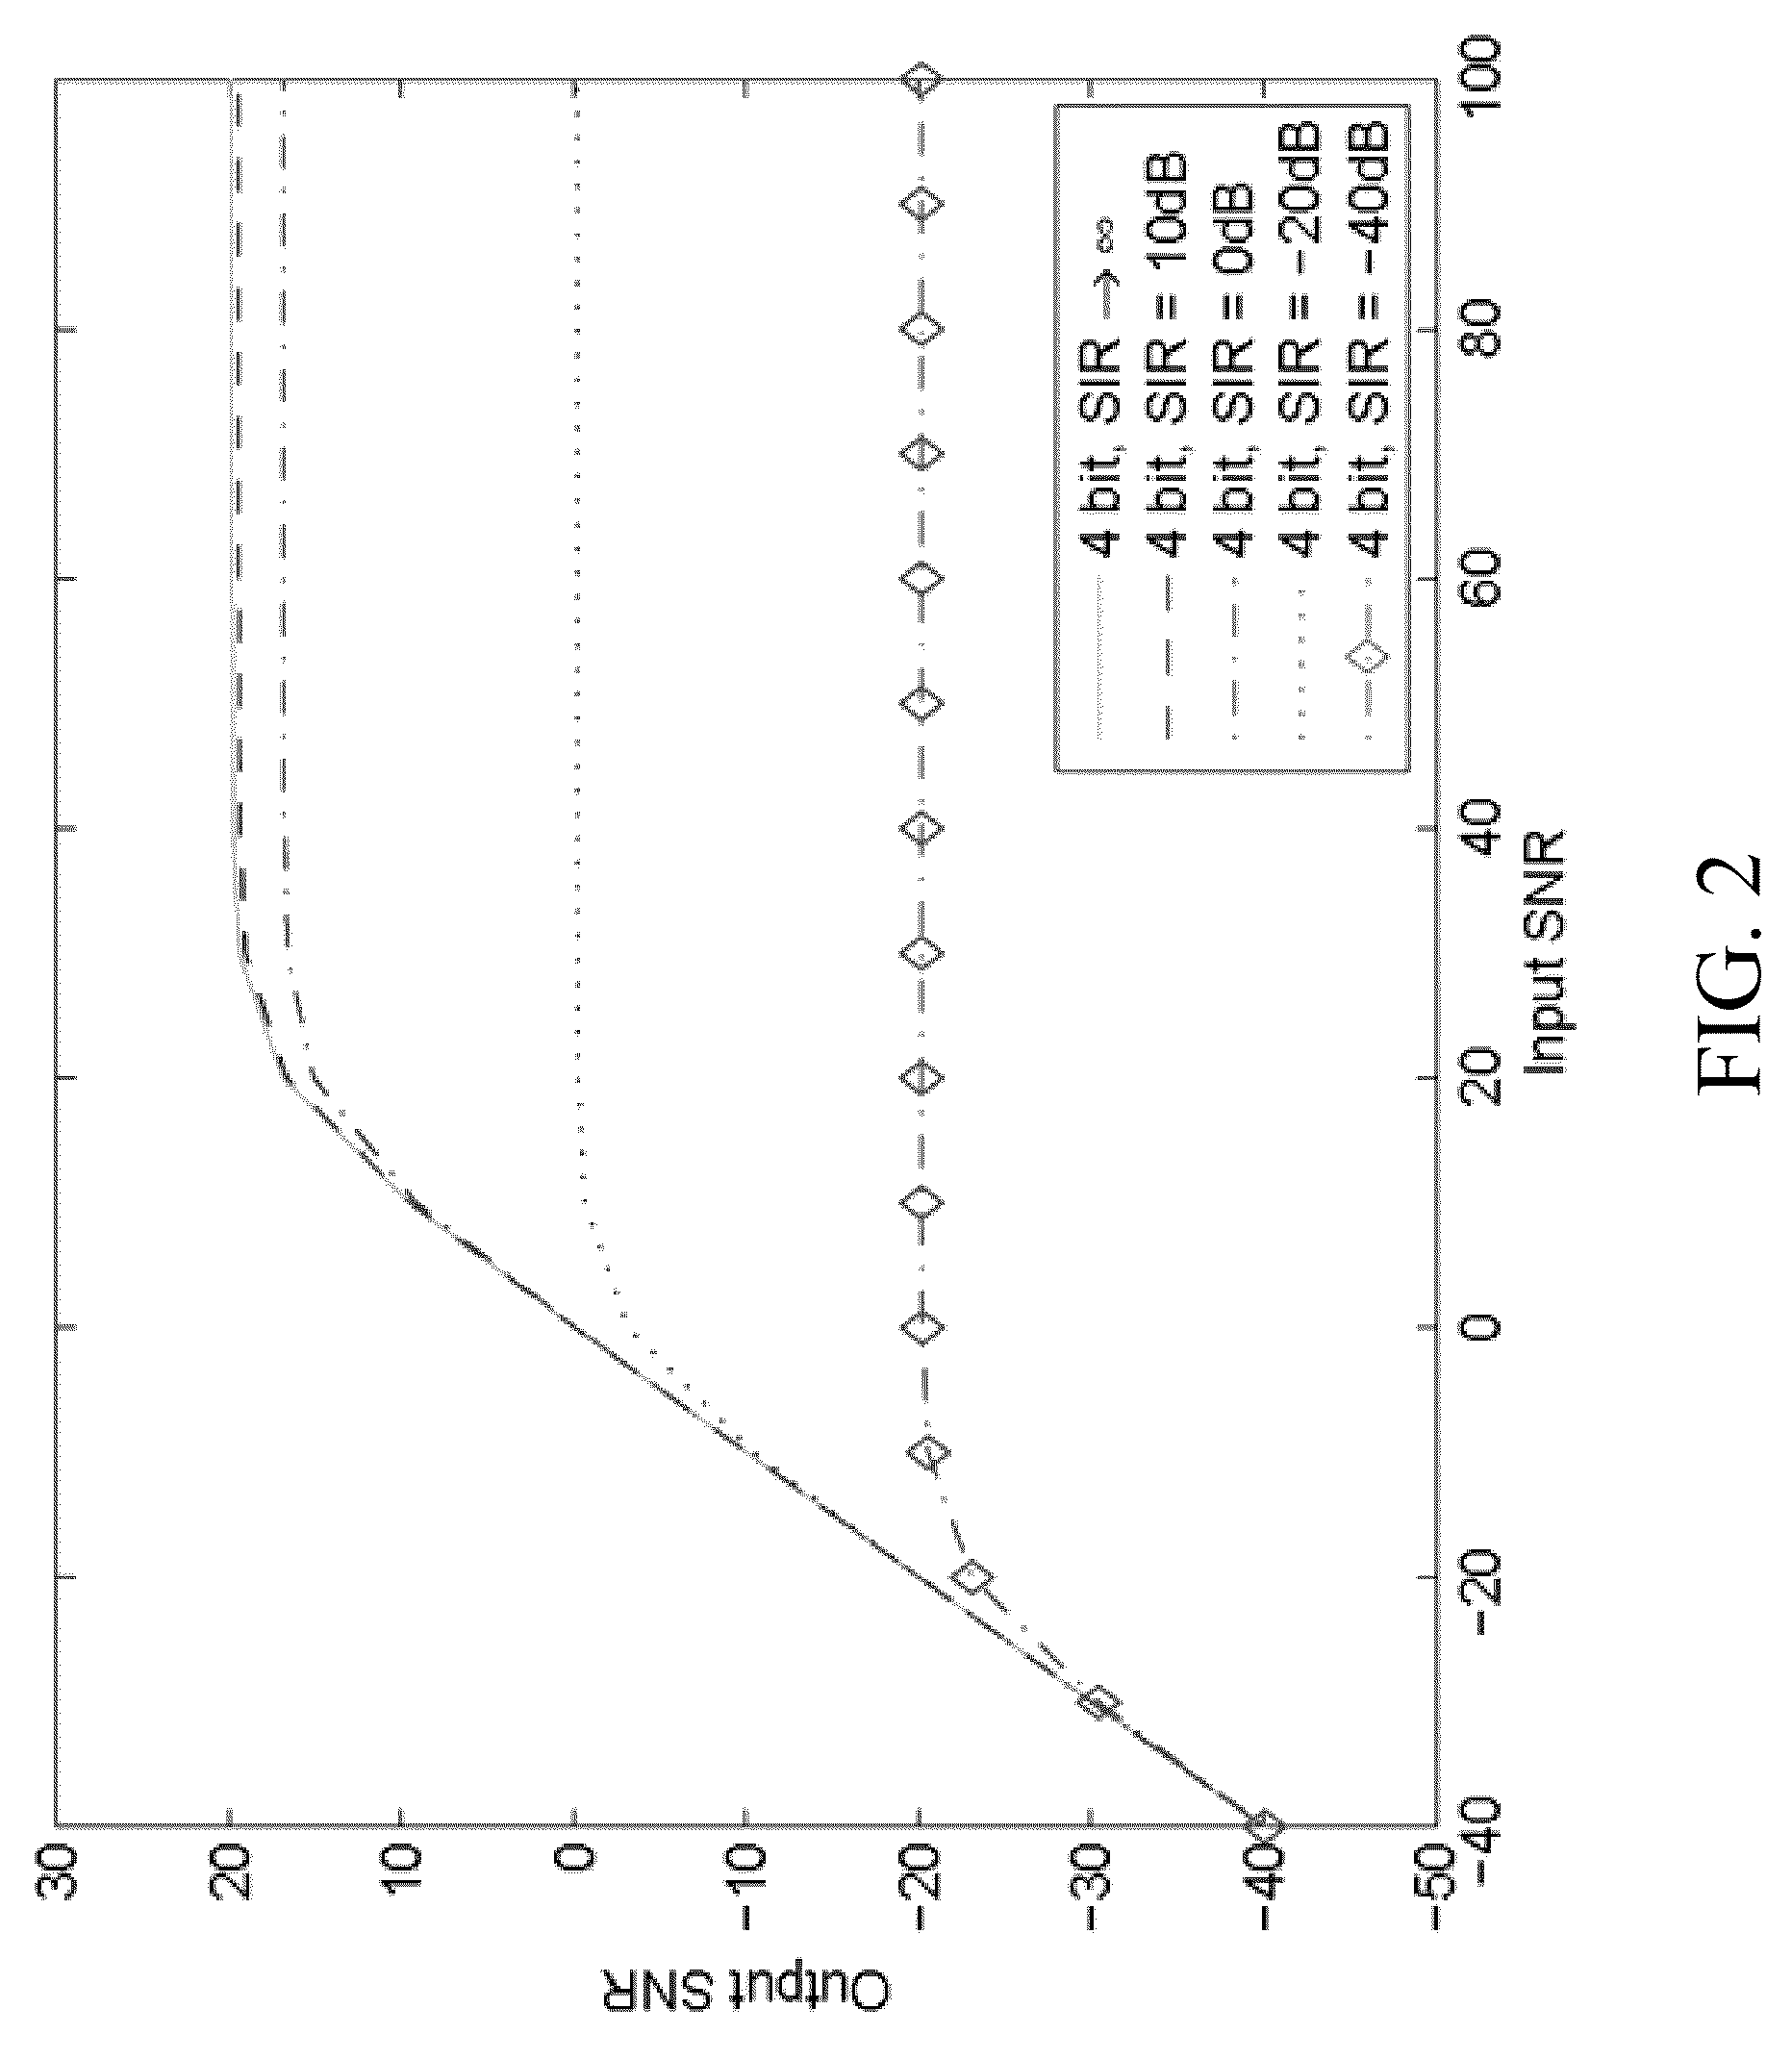 Interference cancellation for full-duplex communications